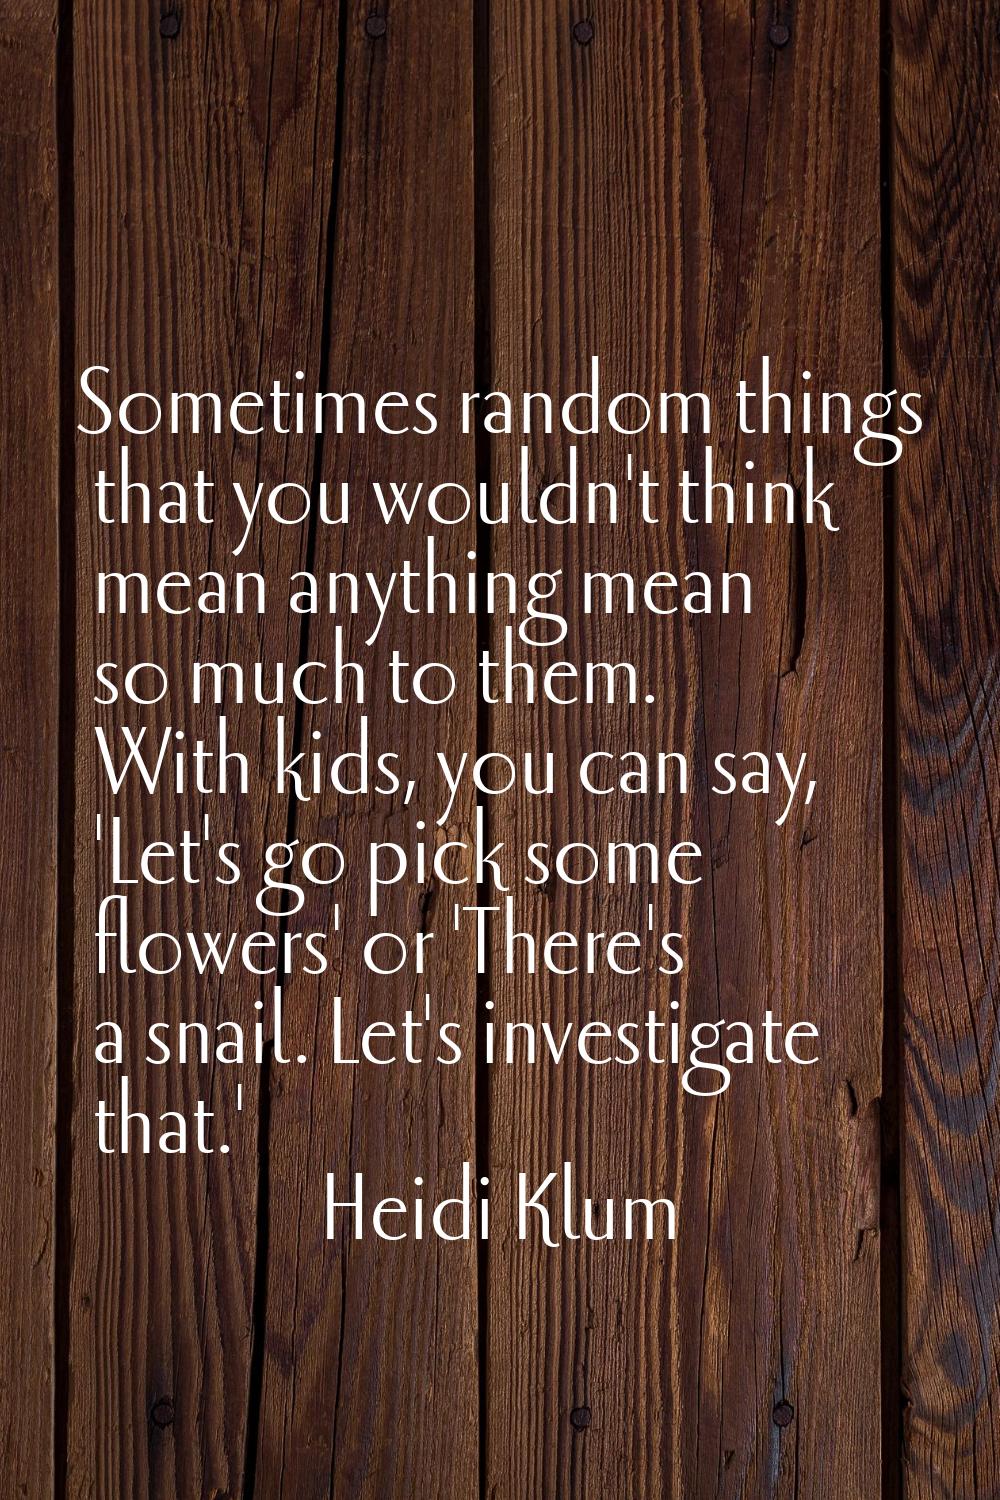 Sometimes random things that you wouldn't think mean anything mean so much to them. With kids, you 